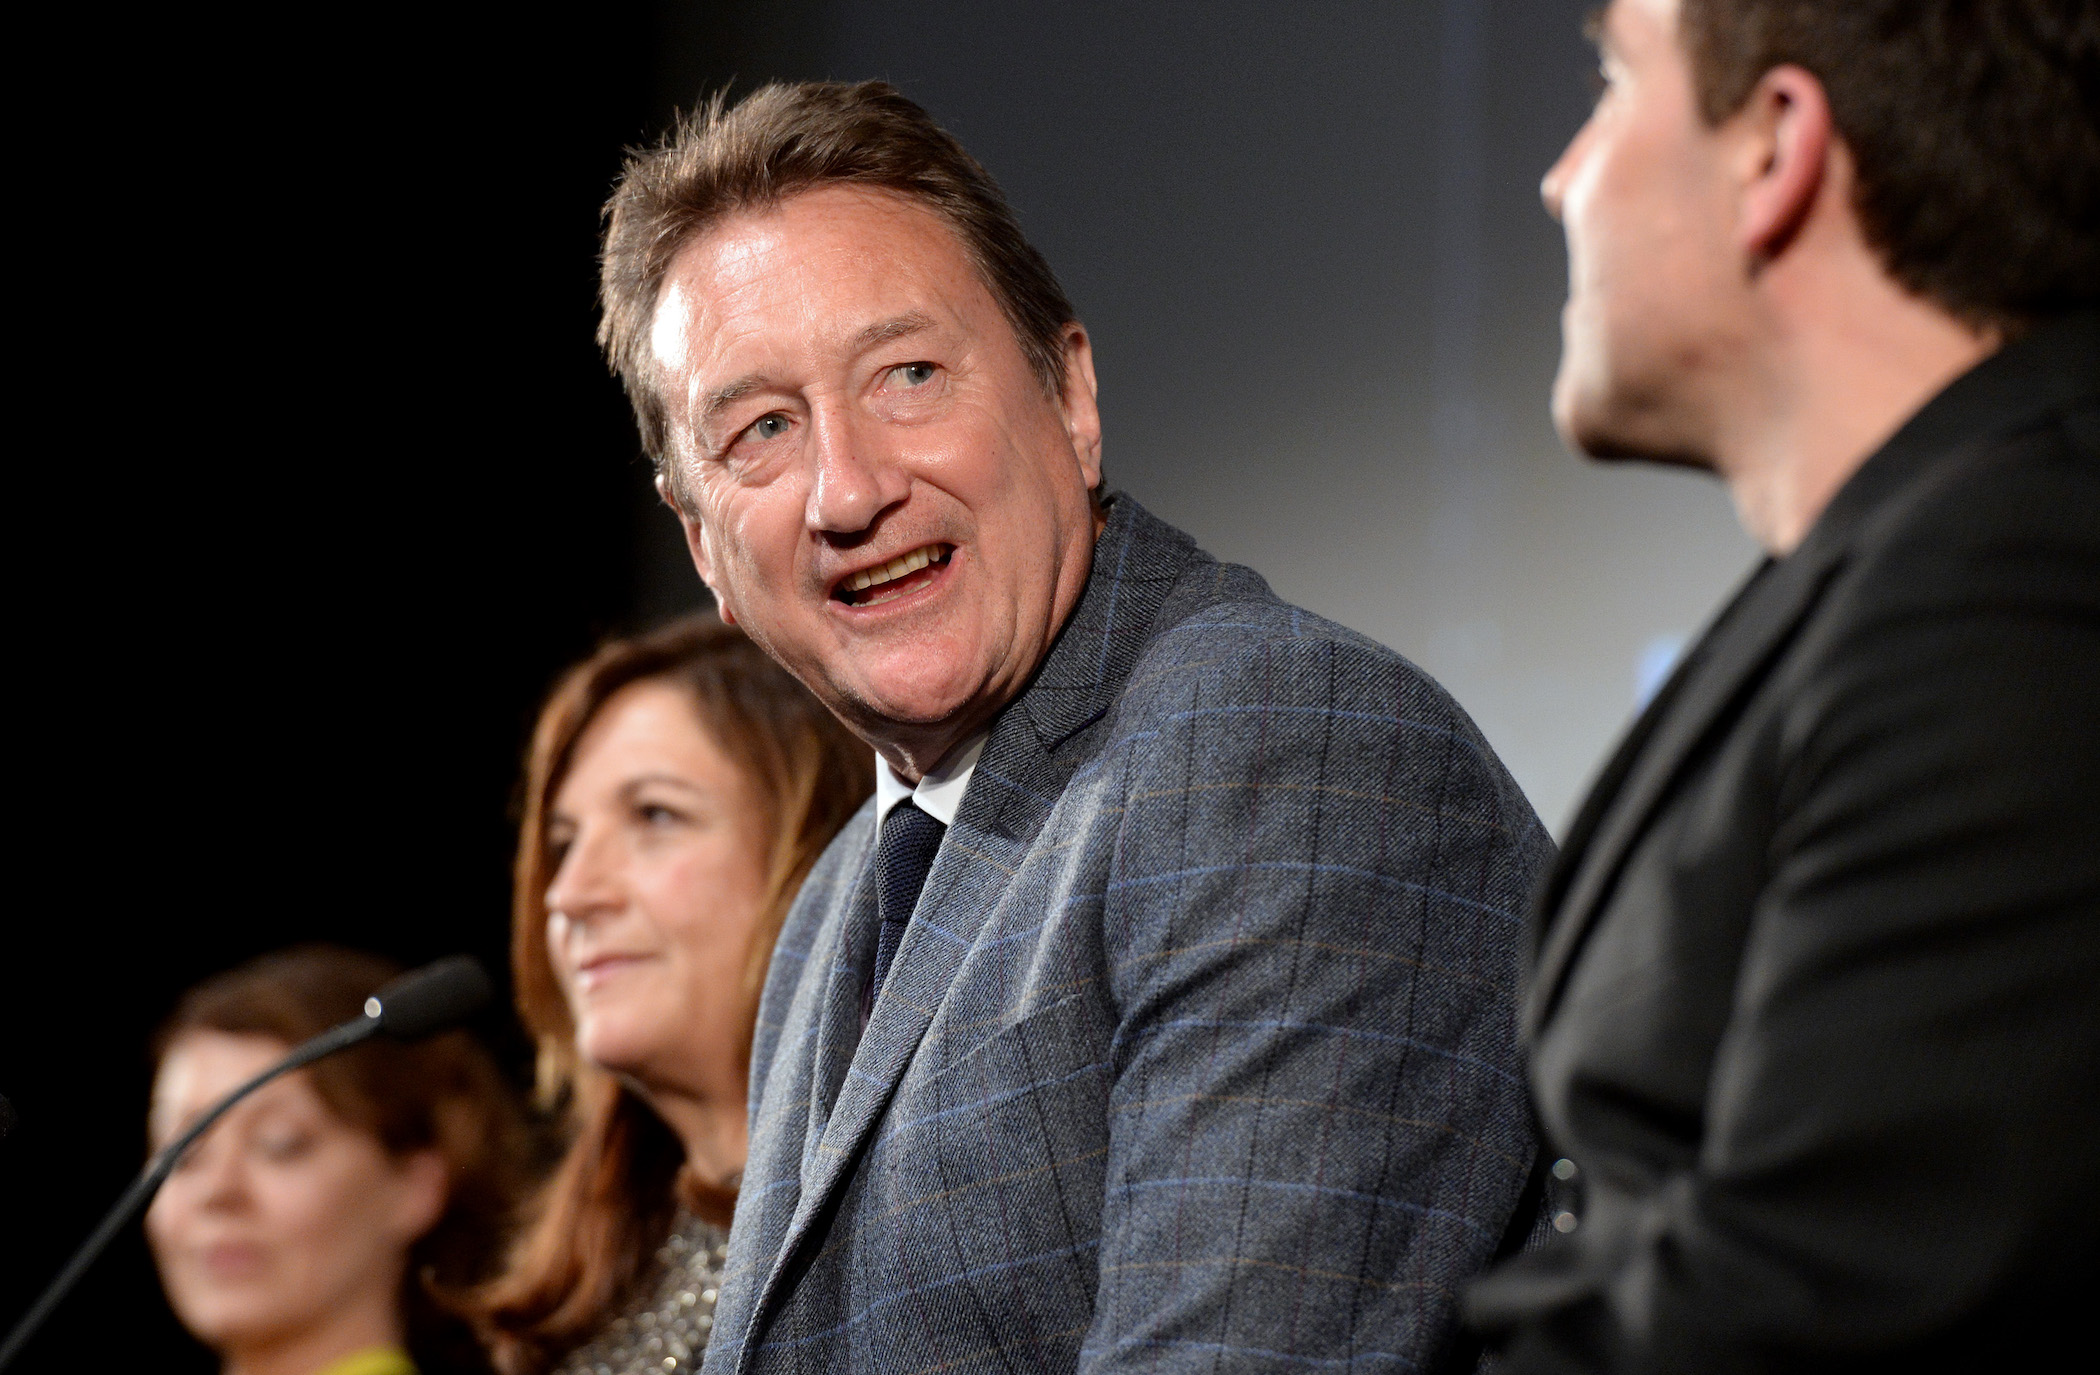 Steven Knight, show creator for 'Peaky Blinders' Season 6, smiling at an event